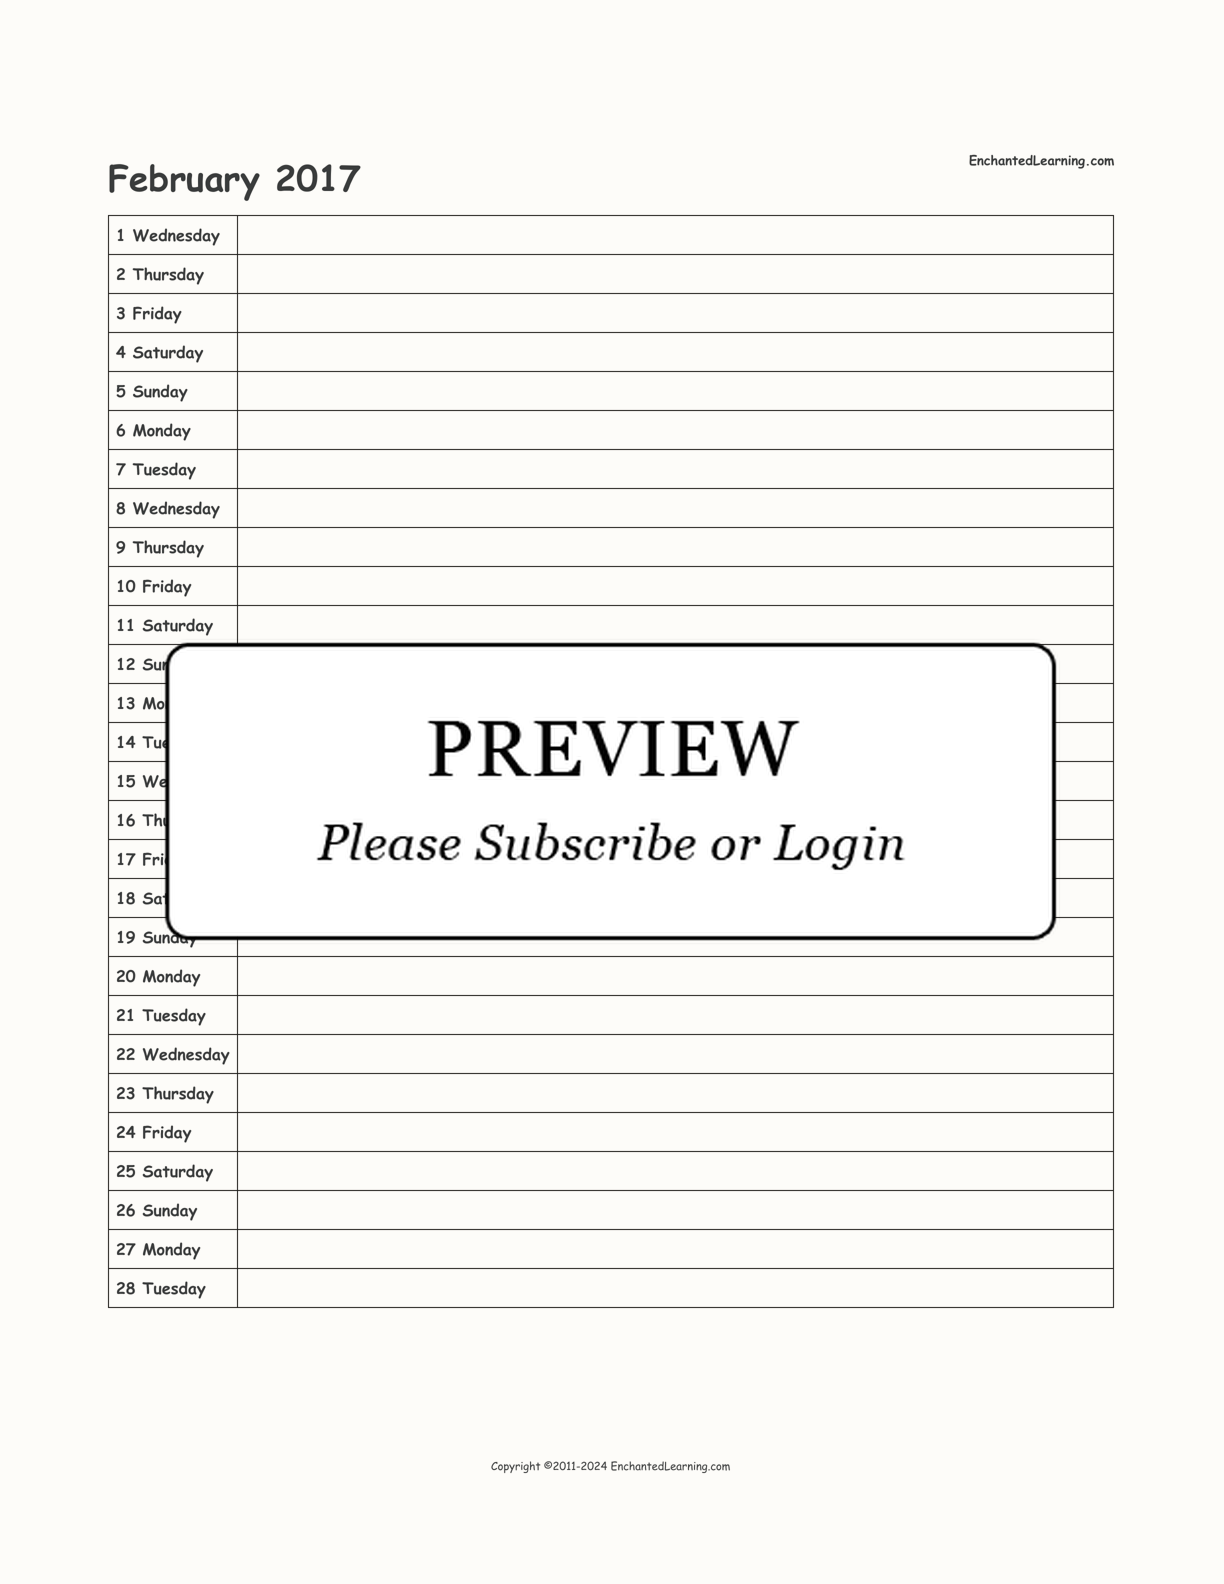 2017 Scheduling Calendar interactive printout page 2